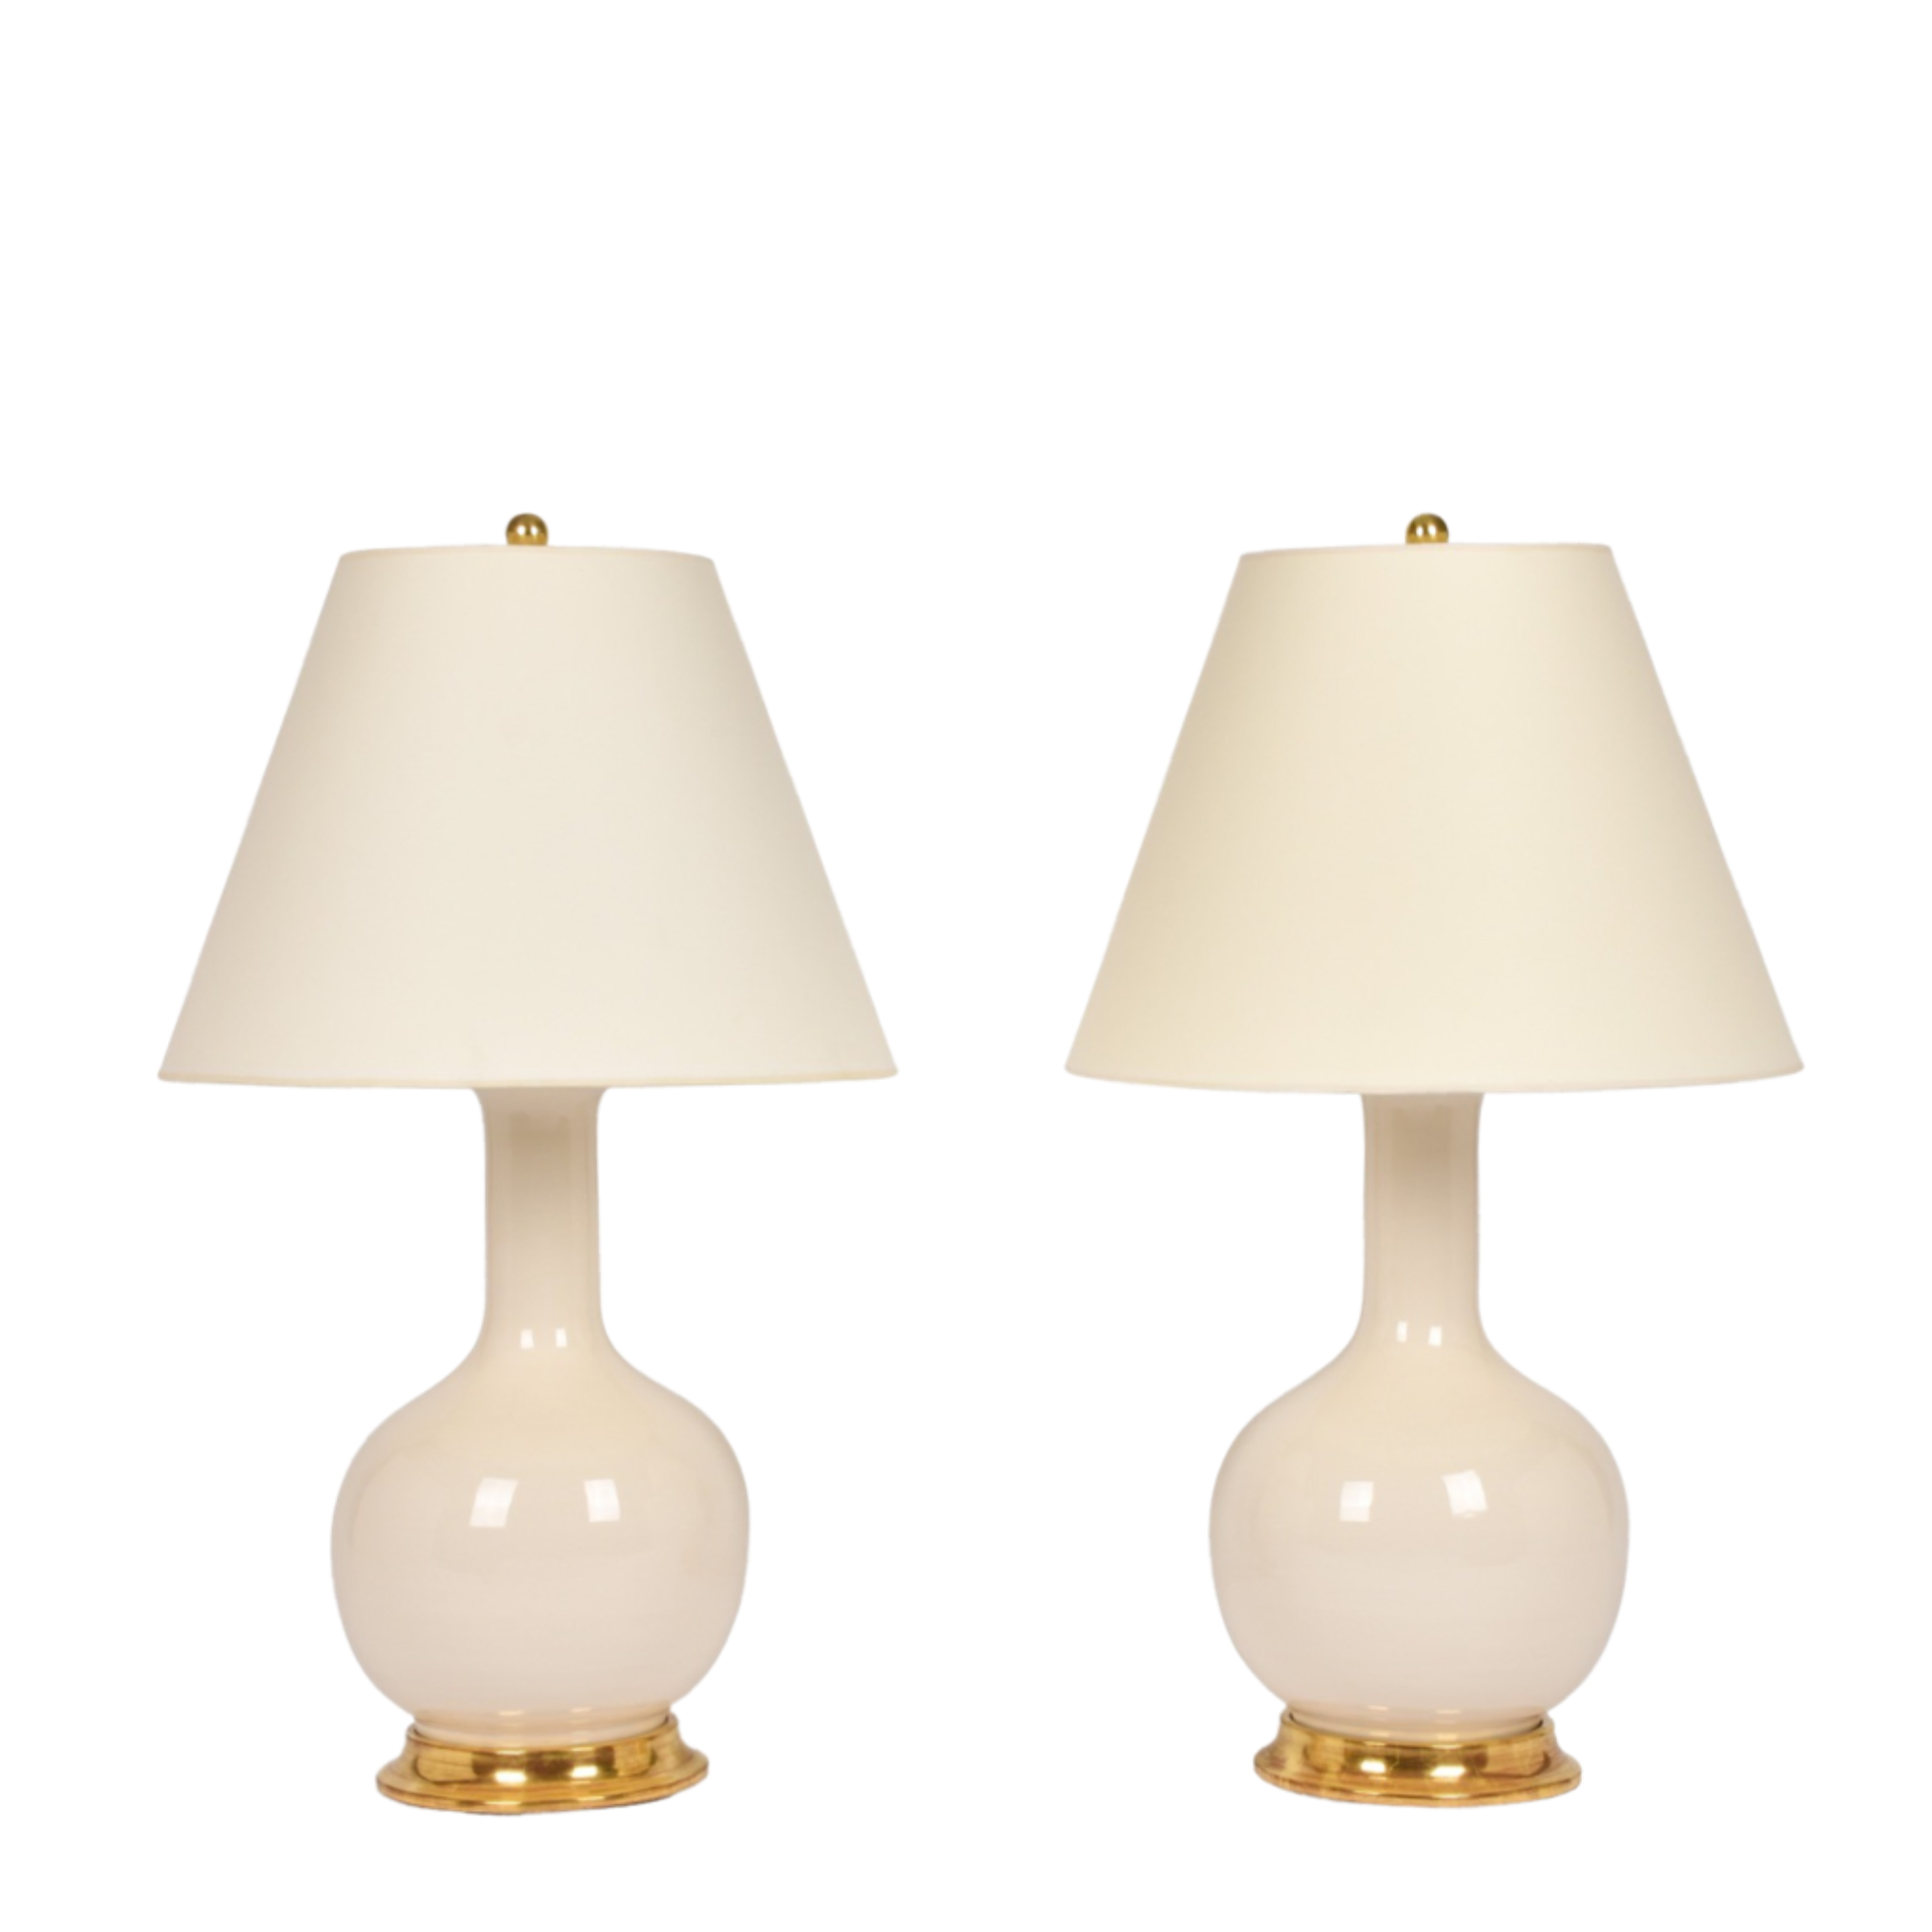 A Pair of Medium Single Gourd Table Lamps in Clear by Christopher Spitzmiller | Newport Lamp And Shade | Located in Newport, RI